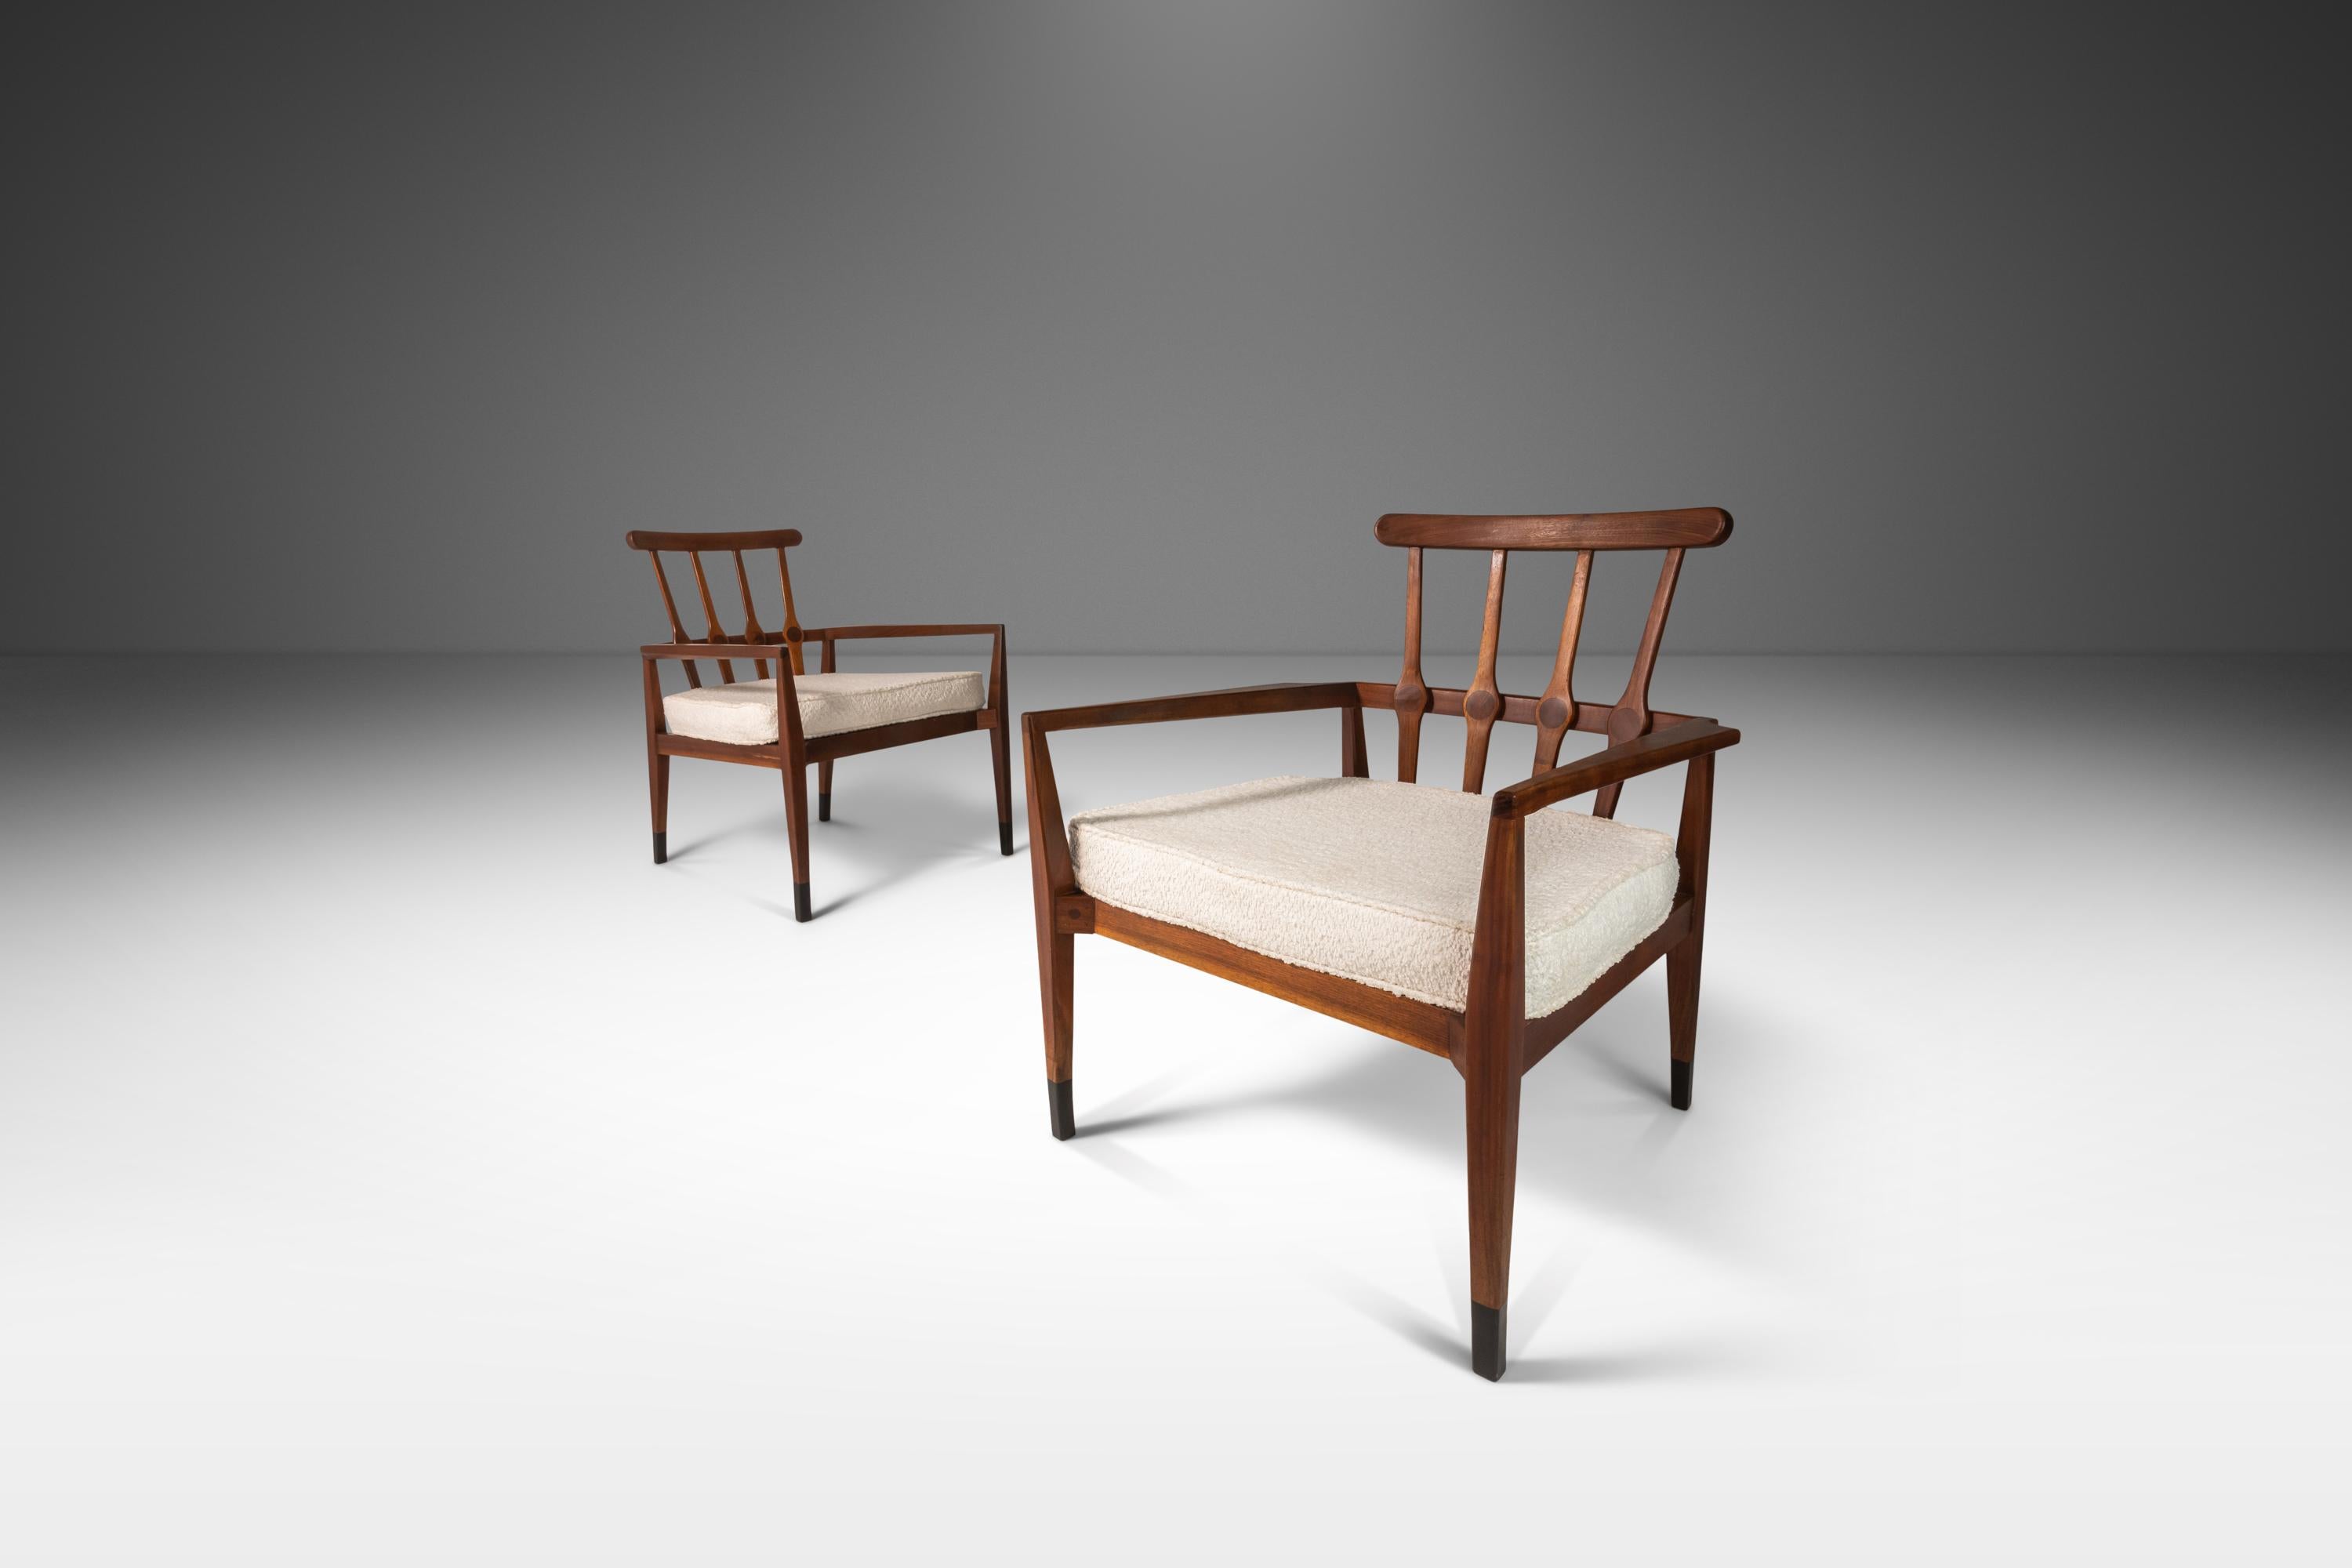 Set of Two (2) Angular Arm Chairs in Walnut & Bouclé by Foster McDavid, c. 1960s For Sale 3